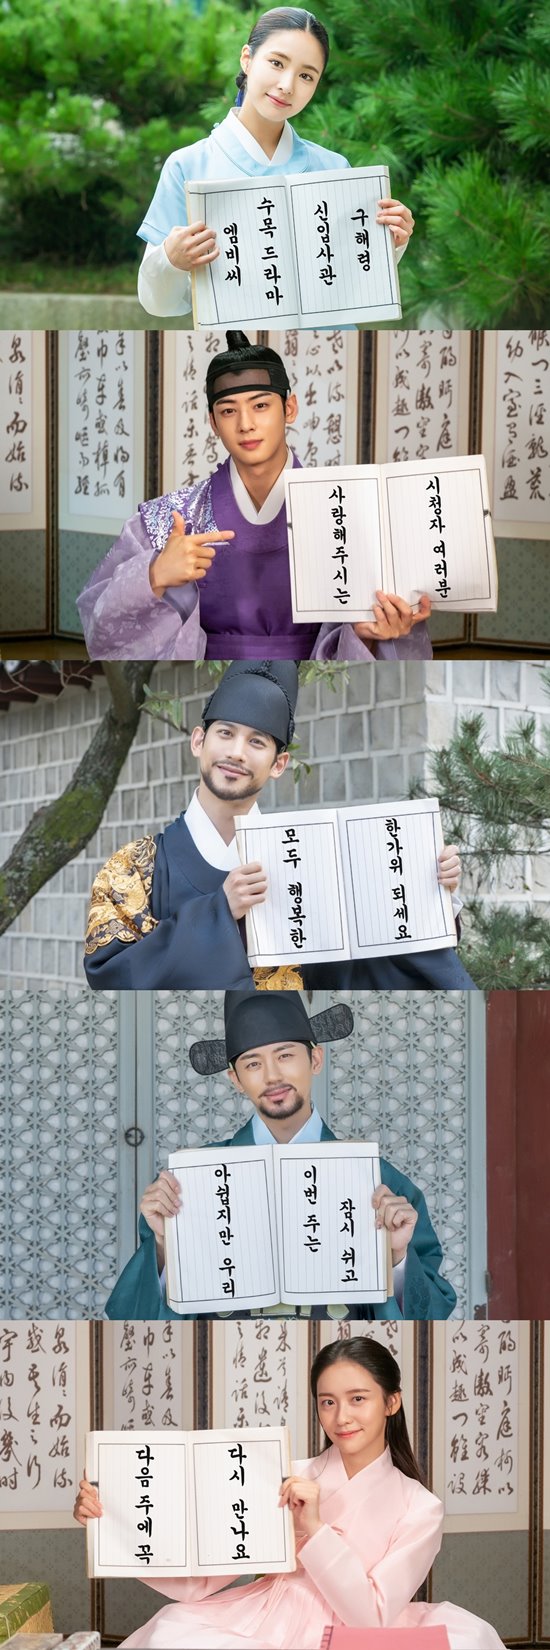 Shin Se-kyung, Cha Eun-woo, Park Ki-woong, Lee Ji-hoon and Park Ji-hyun delivered Chuseok greetings to viewers.MBC drama Na Hae-ryung released a video with SteelSeries, which contains the special Chuseok greetings of the actors on the 11th.Five leading figures from the new employee, Na Hae-ryung, greeted viewers ahead of the Chuseok holiday.The SteelSeries released a book and said, All viewers who love MBC drama new recruits Na Hae-ryung, please send a happy party!Unfortunately, we will rest for a while this week and meet again next week. Shin Se-kyung, who is wearing a blue military uniform and boasts a refreshing charm, said, I am taking a pleasant picture of the love and support you send. He also said, I hope you have a happy holiday.Cha Eun-woo, who rang viewers with sad Confessions last week on the air, caused the heart of those who saw it with a thrilling smile.Well come to a rich holiday and well come to a rich story, he said, raising expectations for next weeks broadcast.Park Ki-woong also laughed at those who said, I hope you have a good time with your family in the national holiday, showing off the charm of soft reversal, unlike the charismatic appearance in the play.Lee Ji-hoon also said, Unlike the blunt officer Min Woo-won, he gave a pleasant Chuseok greeting with a playful appearance. He said, I started shooting in hot summer, but it is Chuseok.I hope you have a good time with your family.  Please love Na Hae-ryung! Finally, Park Ji-hyun caught his eye with a beautiful uniform, not a military uniform.She said with a sweet smile, I will be very sorry for the Chuseok holiday, but I would like to ask for more love and support next week.In the 29-32 episode of the new employee, Na Hae-ryung, was portrayed as Na Hae-ryung and Lee Rim, who had a romance crisis due to the sudden preparation of Lee Rims wedding.Na Hae-ryung finally rejected Irims love Confessions, and the two of them were excited by each others mixed hearts and stimulated the tears of viewers.Among them, the Seoraewon incident 20 years ago is gradually revealed on the surface of the water, and interest in the future story is increasing.Photo = Green Snake Media